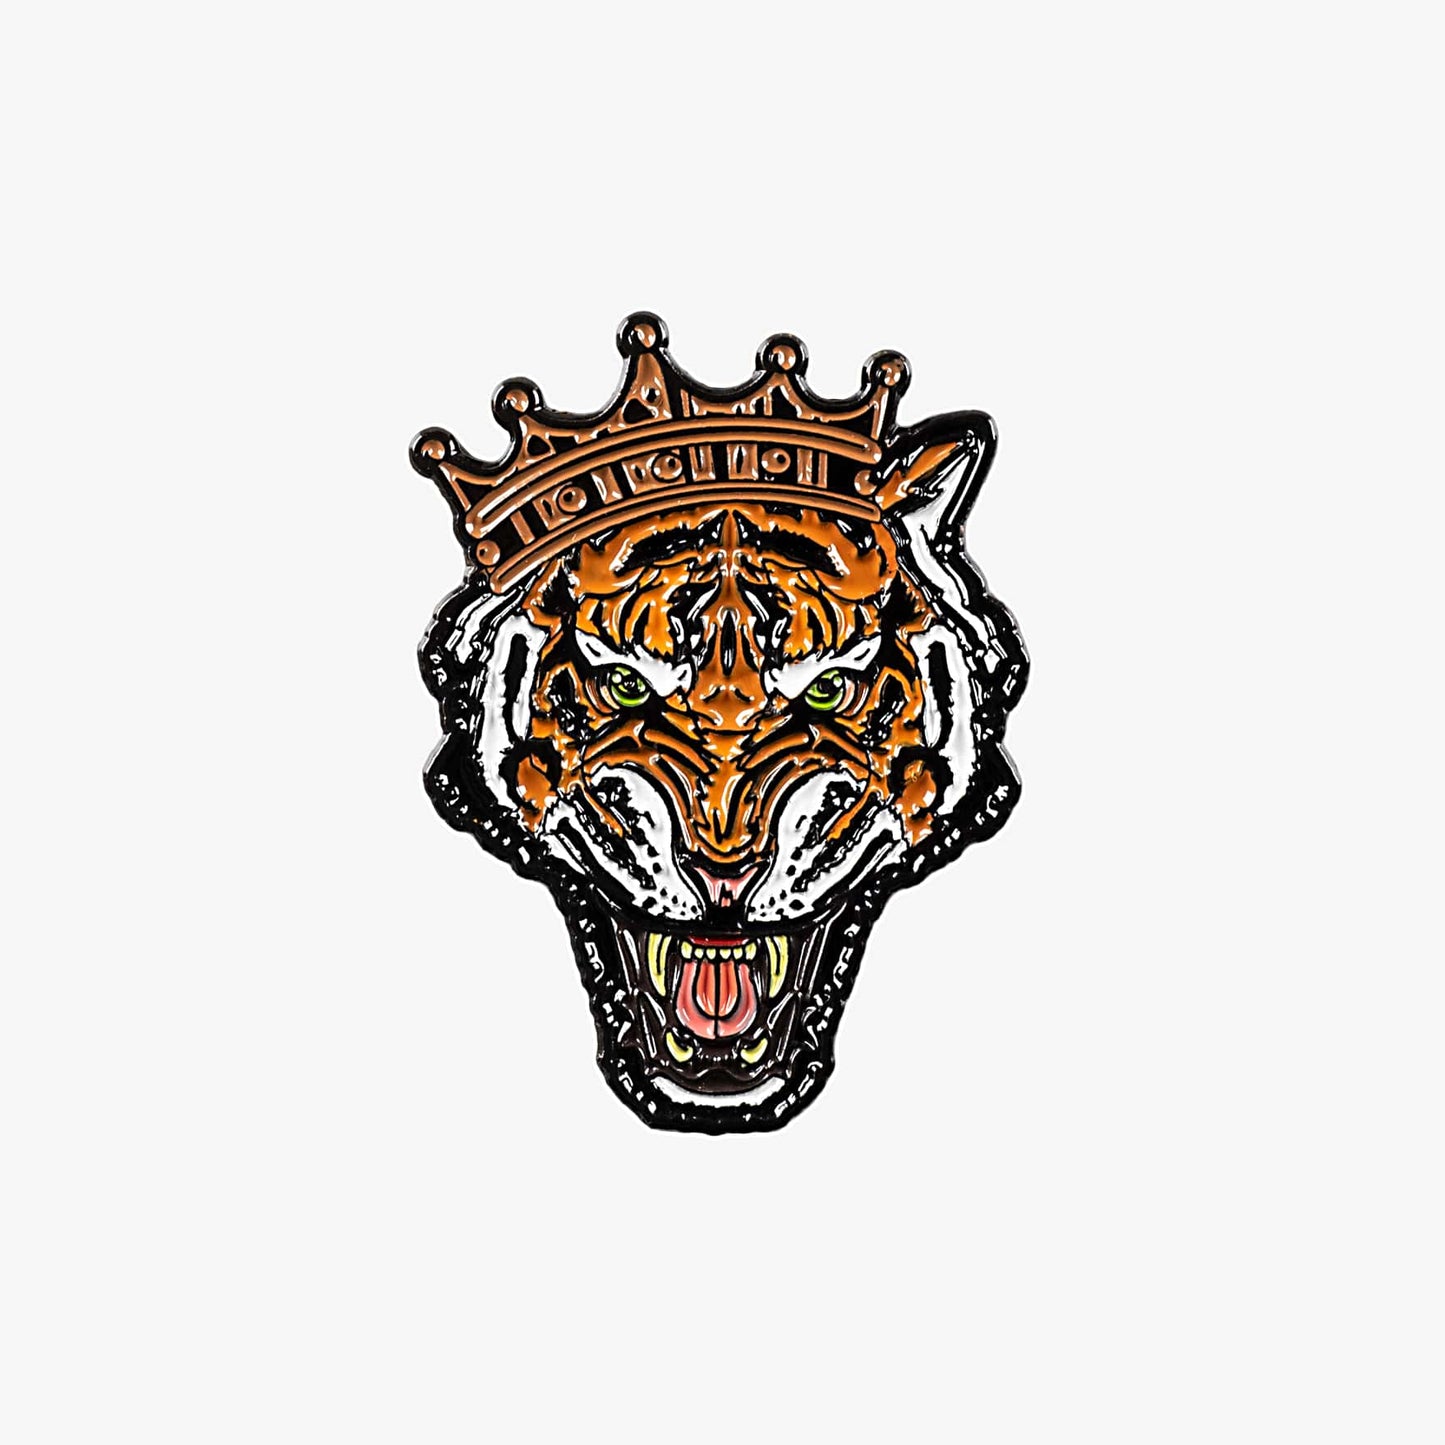 Golf ball marker with tiger and crown design